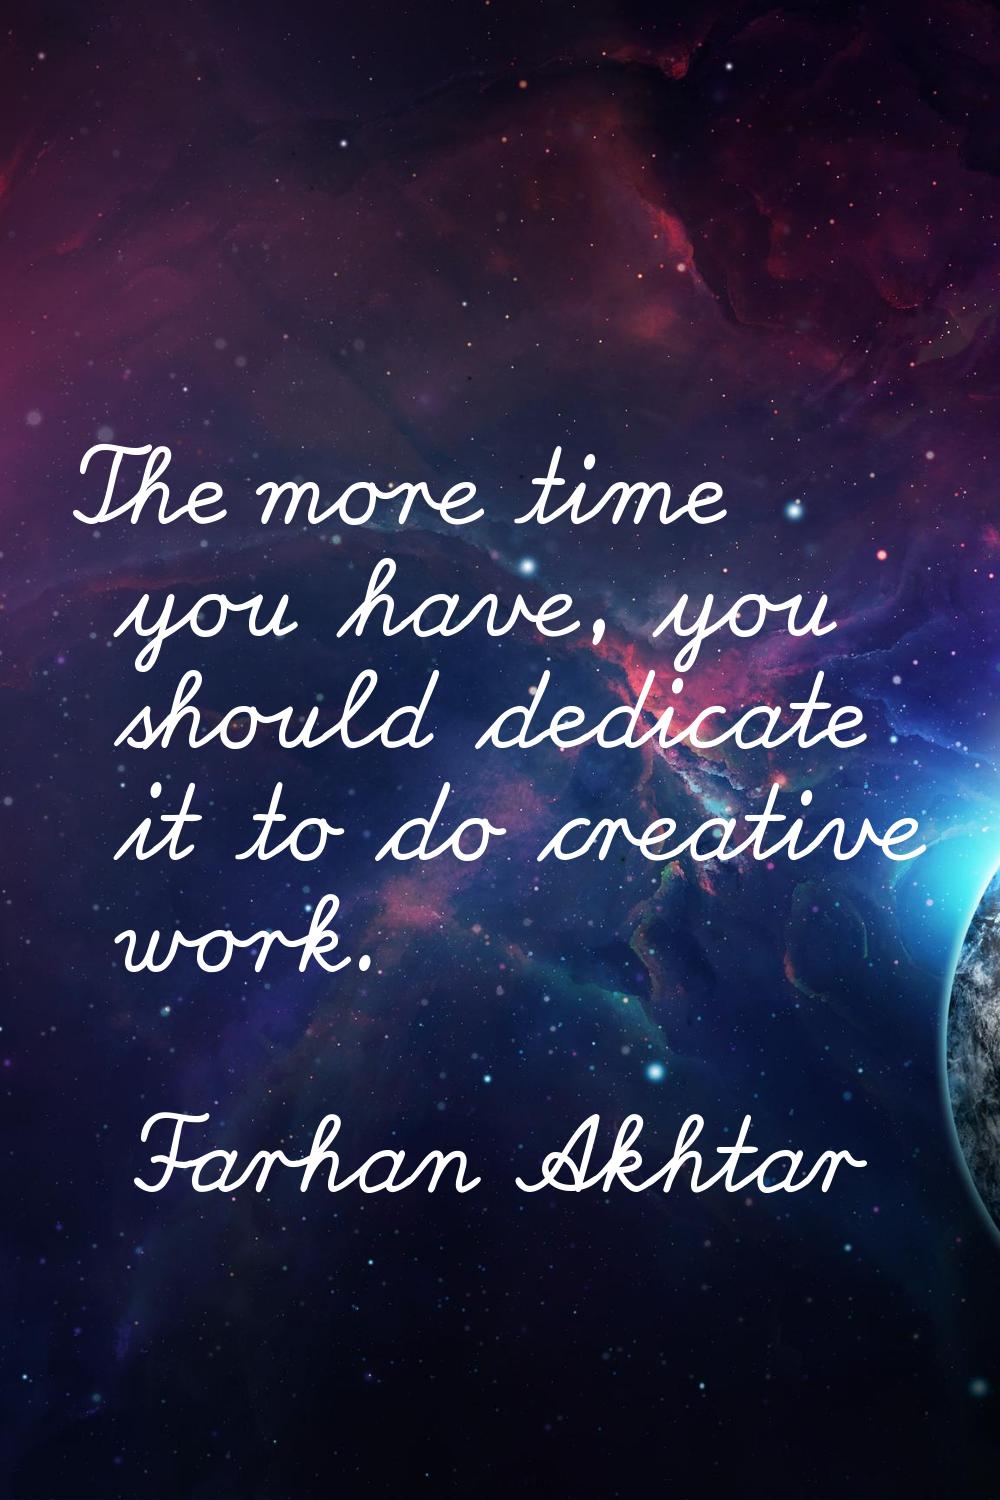 The more time you have, you should dedicate it to do creative work.